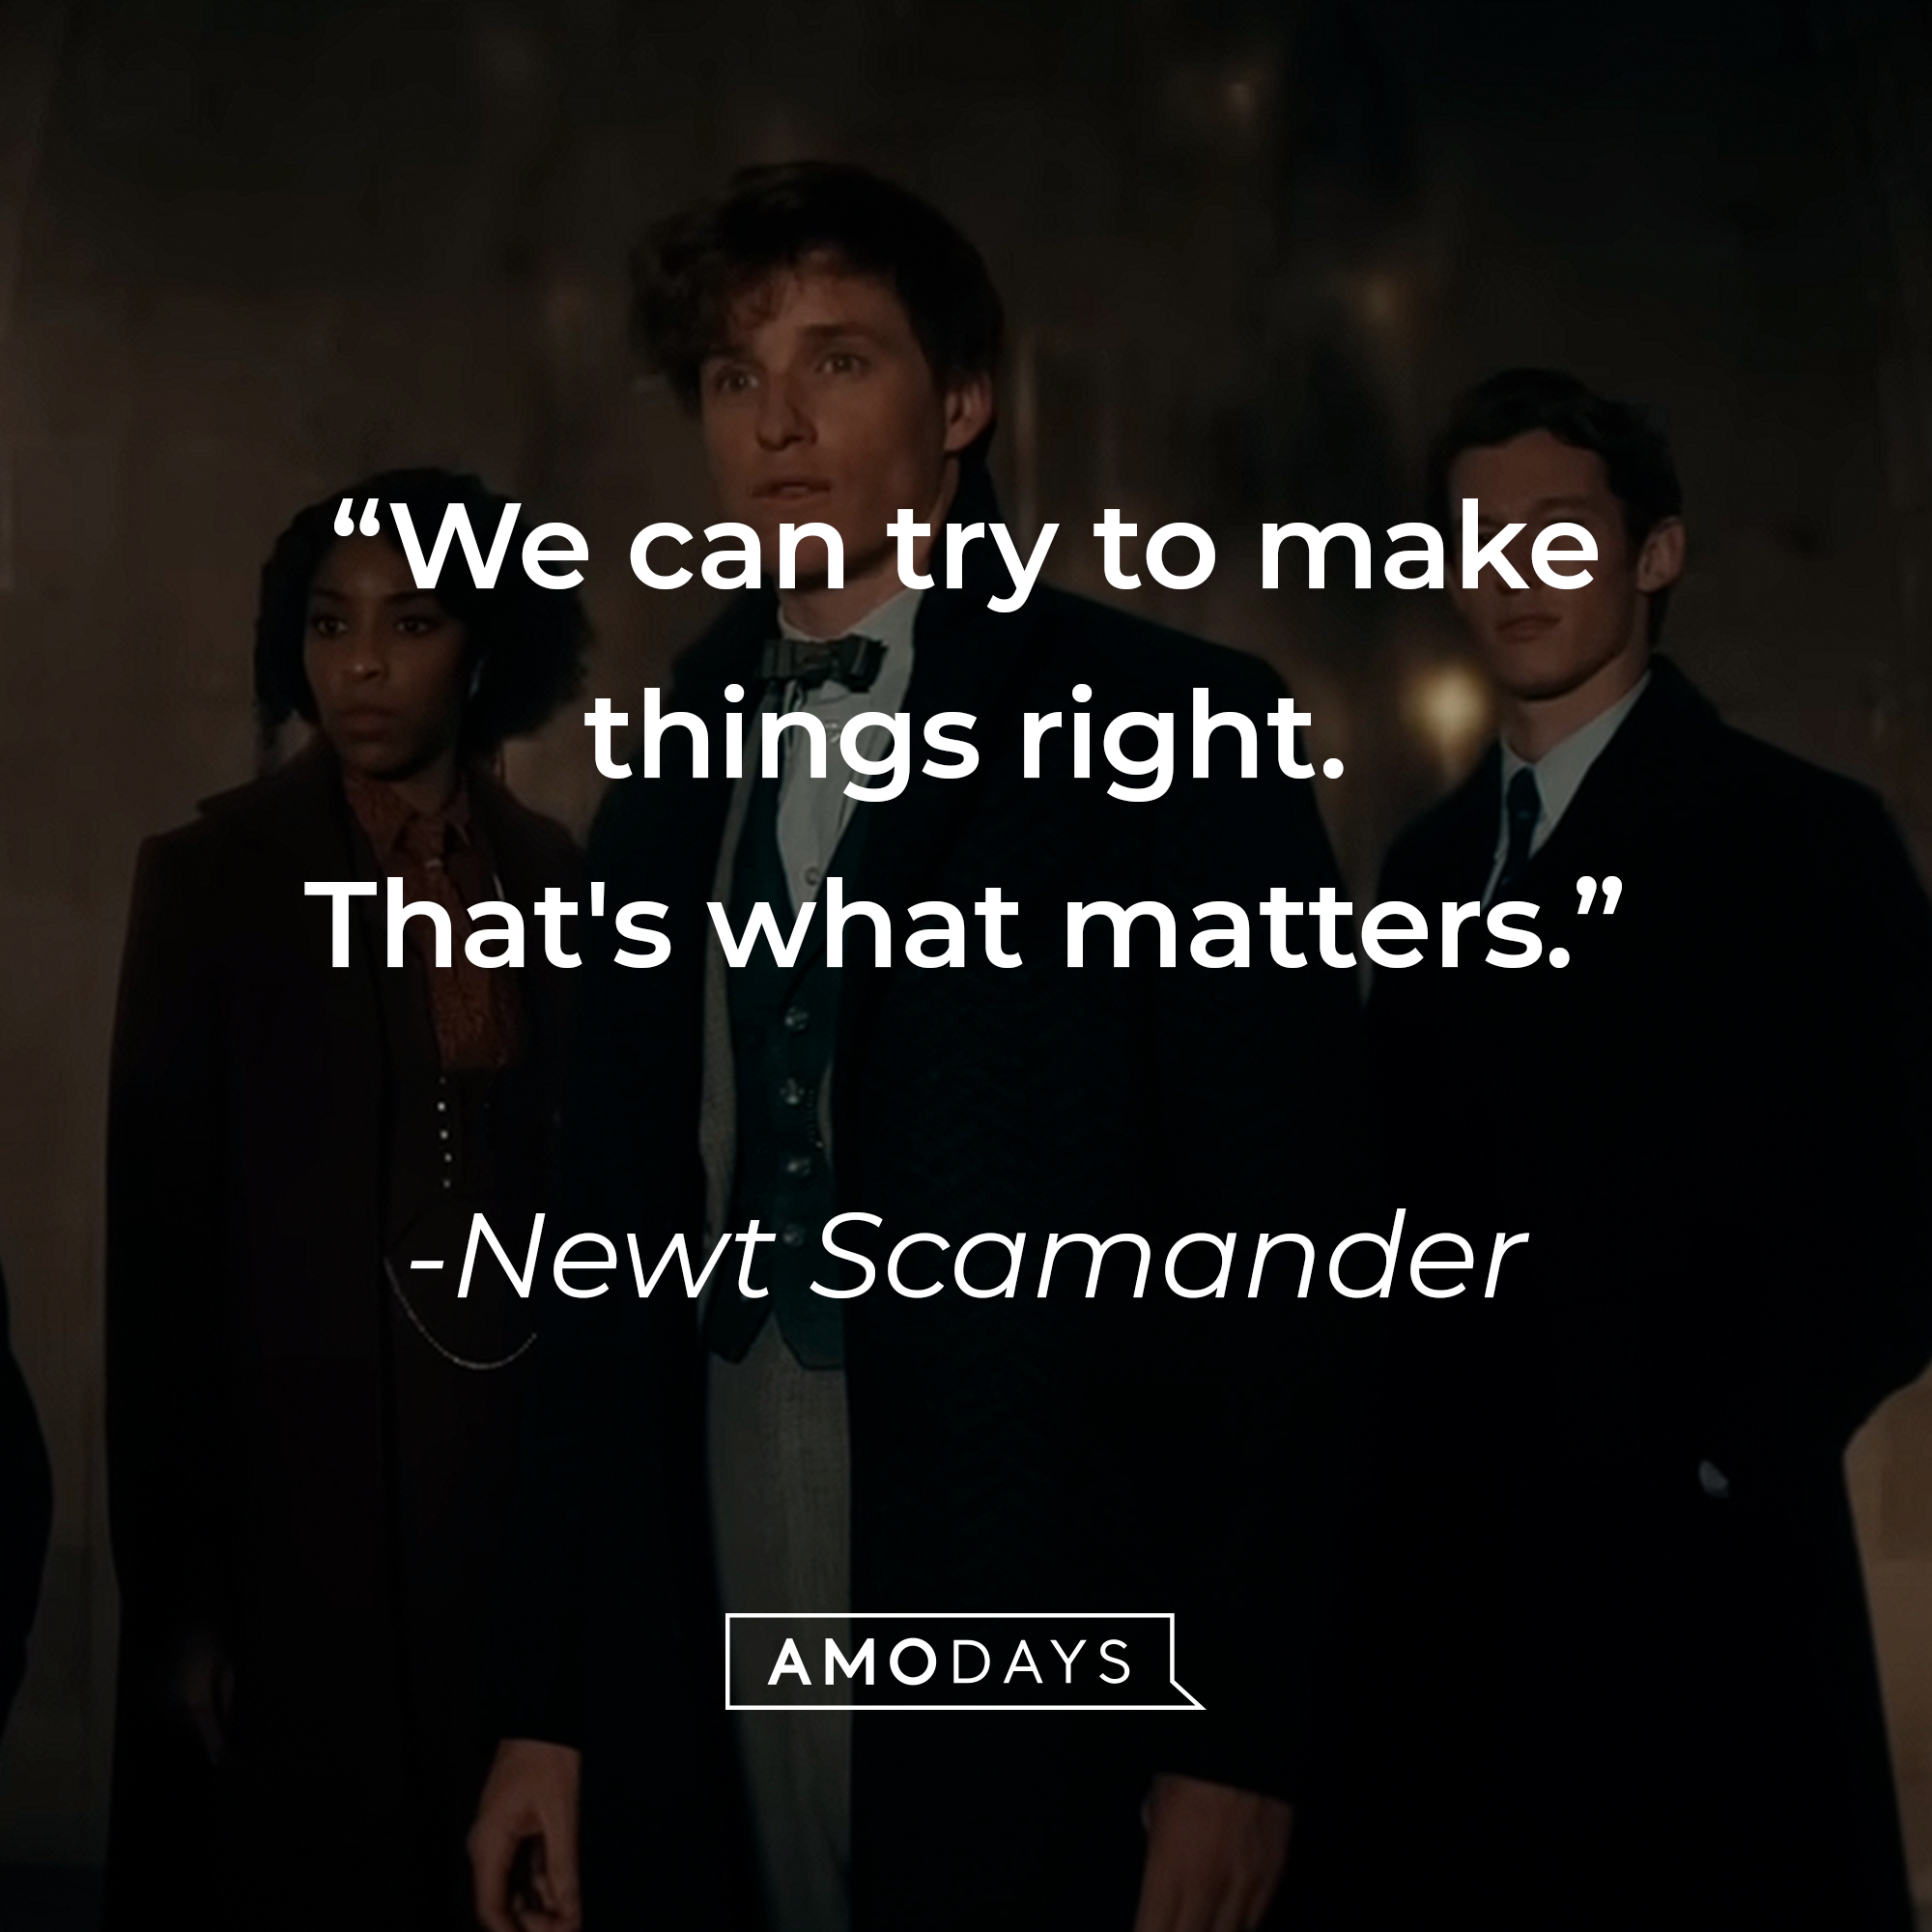 Newt Scamander, with two other characters, and his quote: "We can try to make things right. That's what matters." | Source: Youtube.com/WarnerBrosPictures